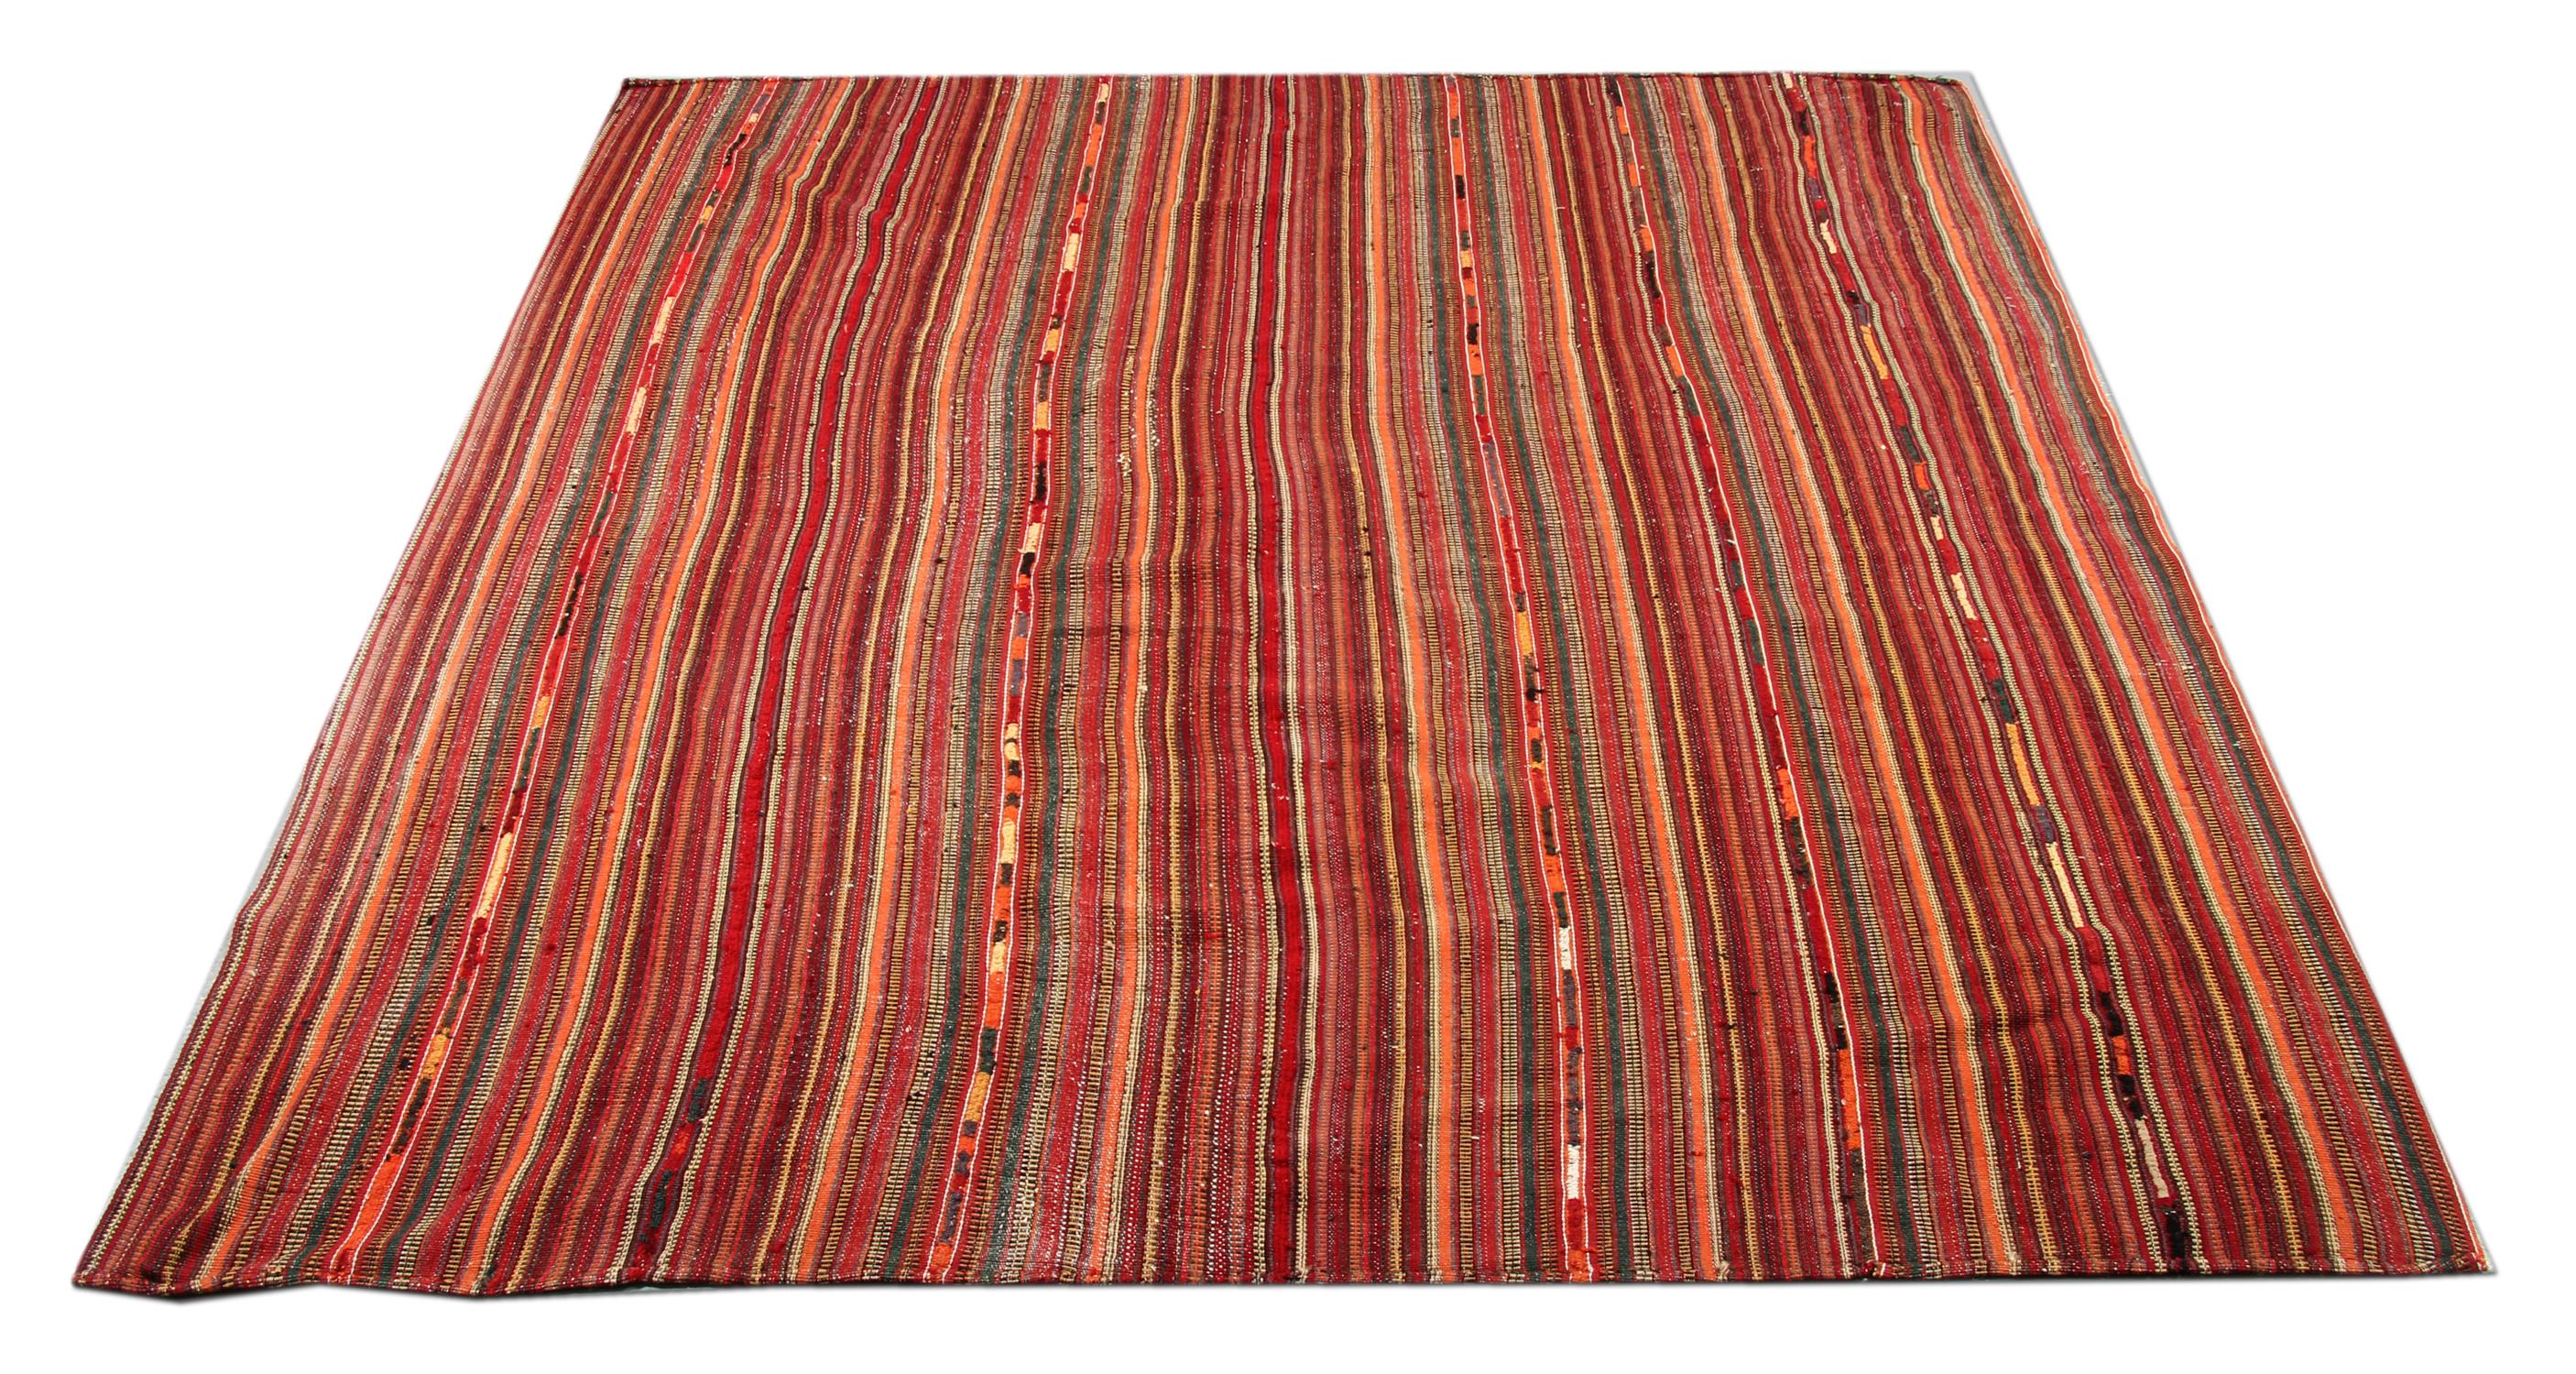 Red, ivory orange and black make up the main colors in this elegant Jajim textile. Woven by hand with a simple striped design. Both the color and design is sure to instantly uplift any home interior. Constructed with fine, hand-spun wool which has